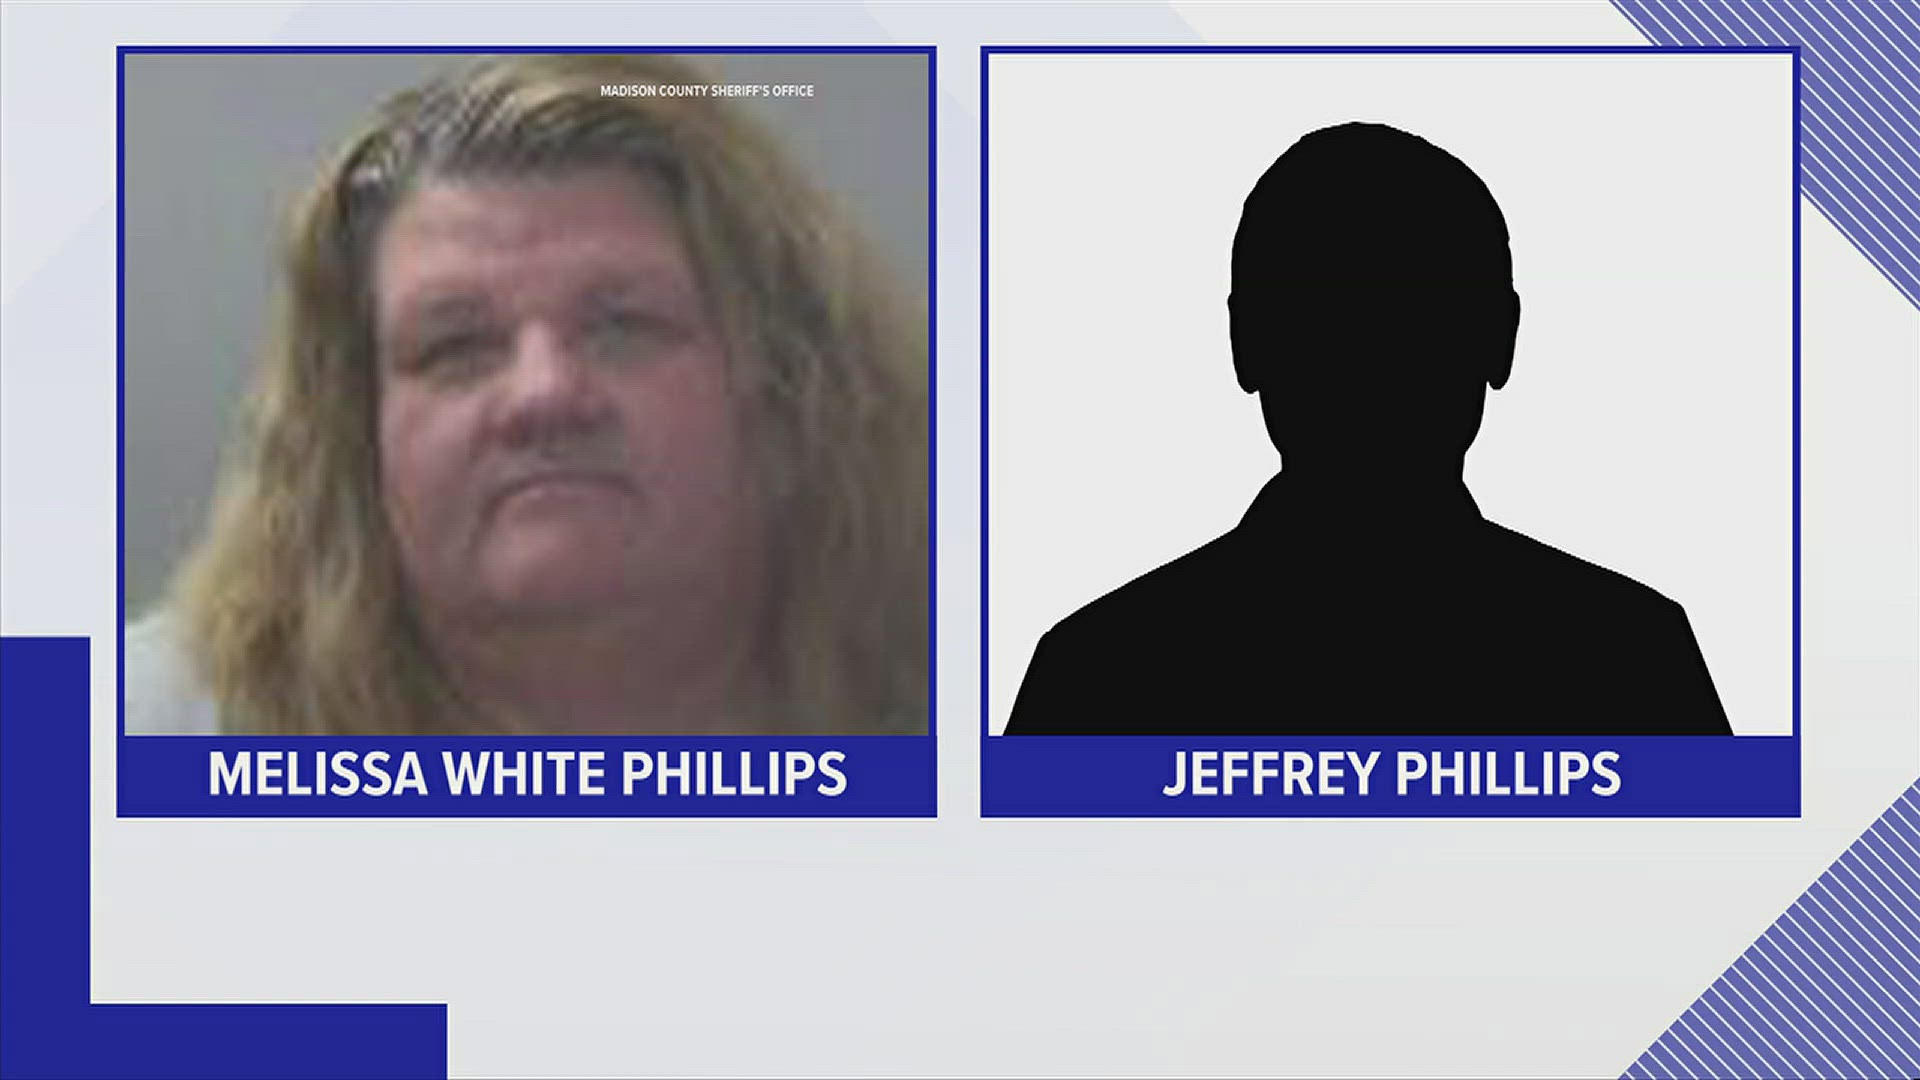 One of the dogs owned by Melissa White Phillips and Jeffrey Phillips was involved in a previous attack case.